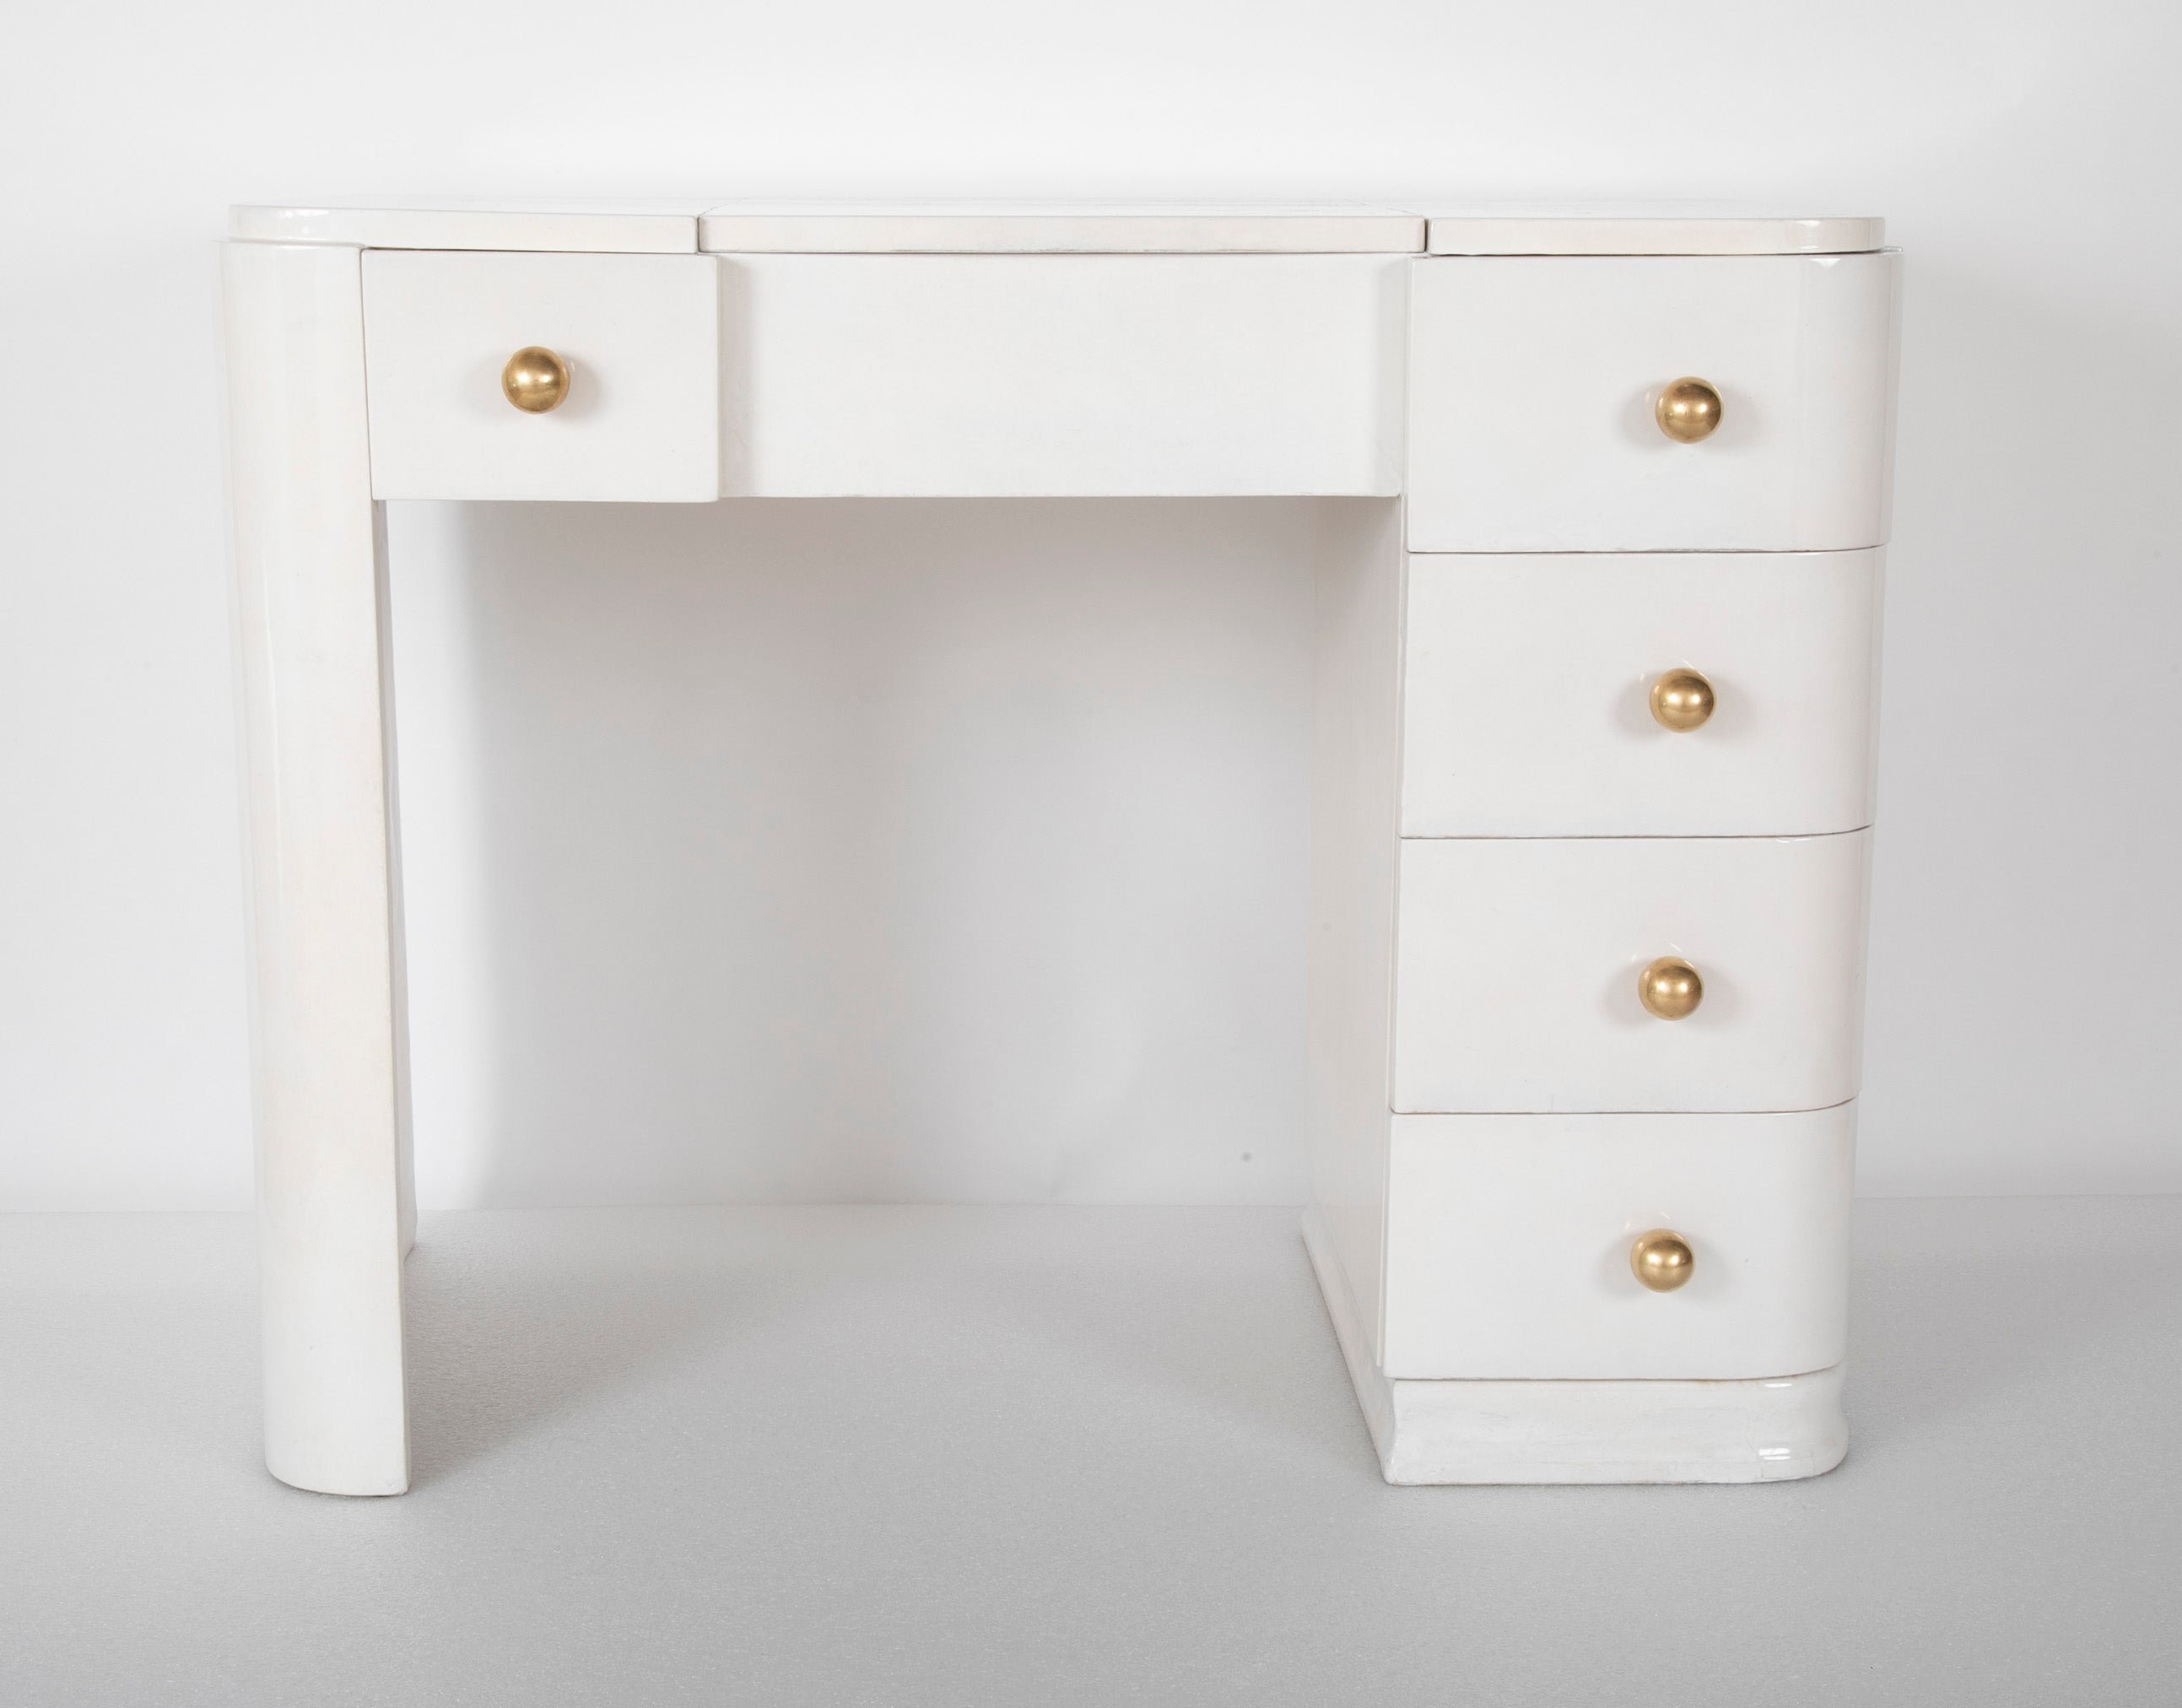 A French Parchment Dressing Table / Desk